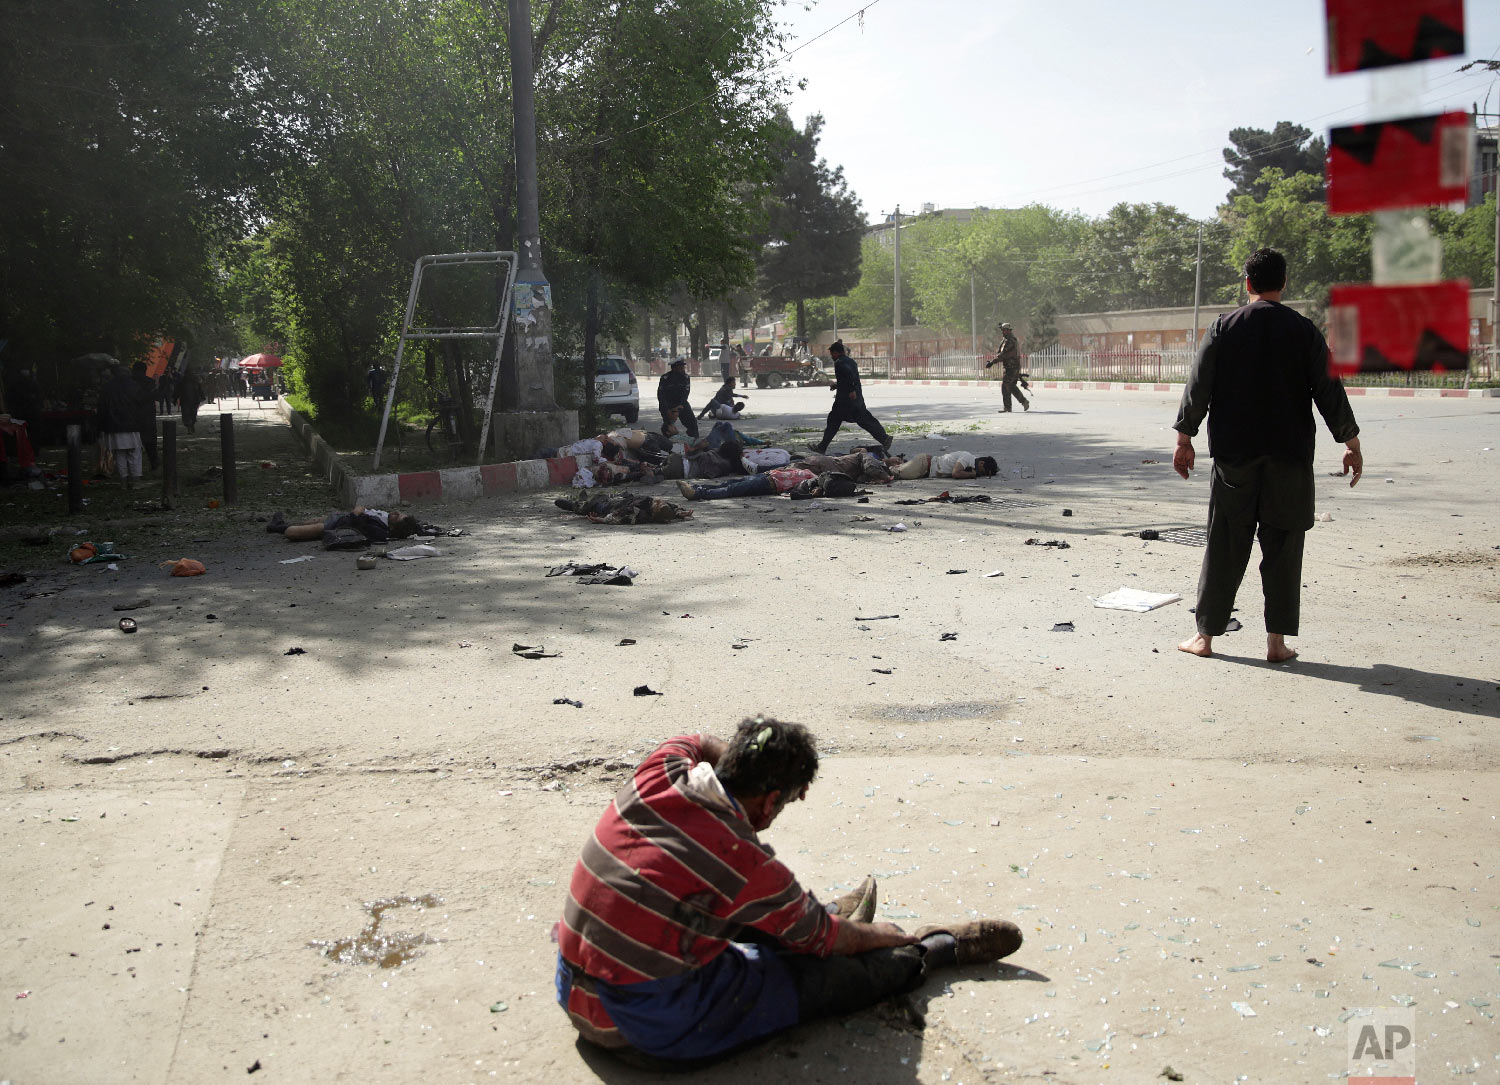  A wounded man sits on the ground after explosions in central Kabul, Afghanistan, on April 30, 2018, following a coordinated double suicide bombing. (AP Photo/Massoud Hossaini) 